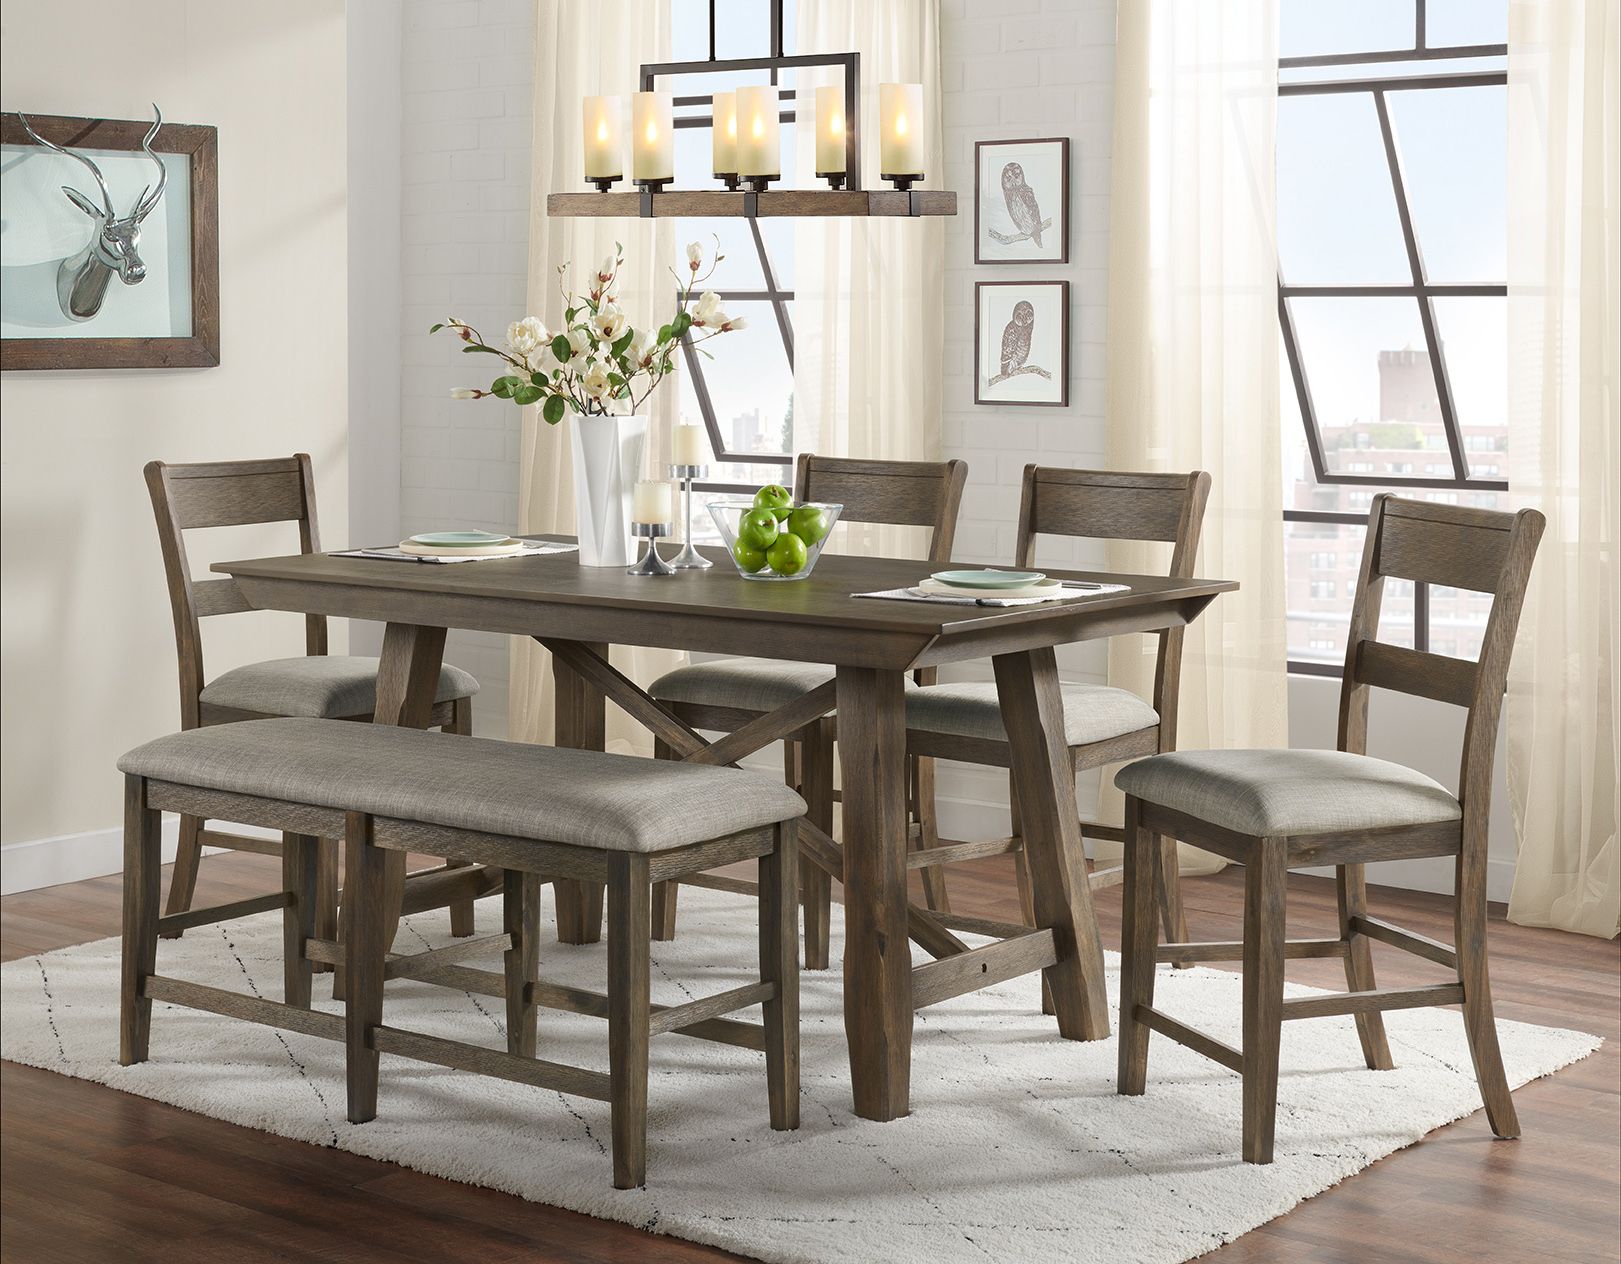 Hillcrest 6 Piece Counter Height Dining Set - VH4300-6PC